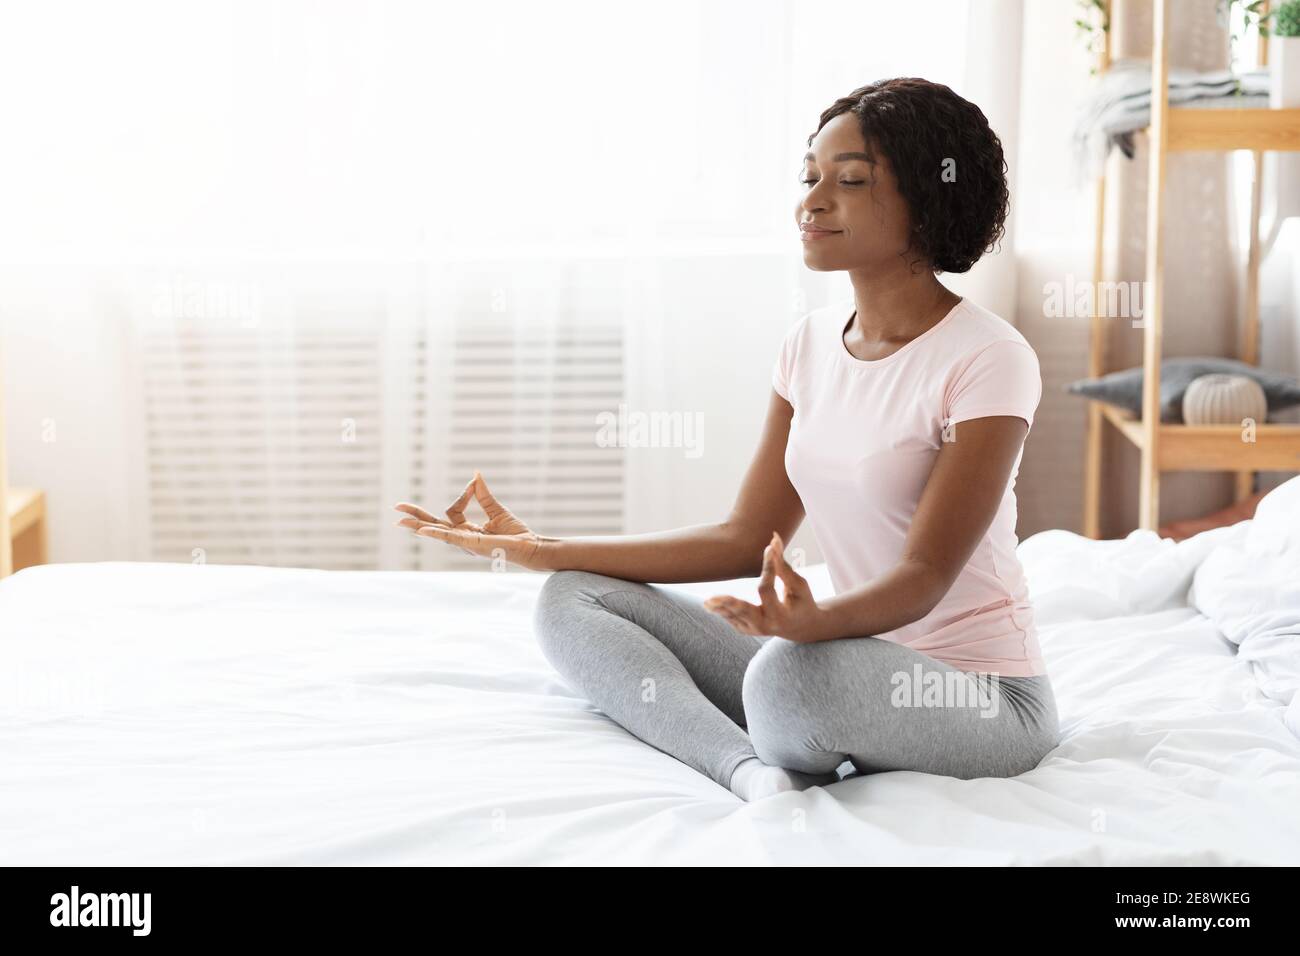 Relaxed black woman sitting on bed and meditating Stock Photo